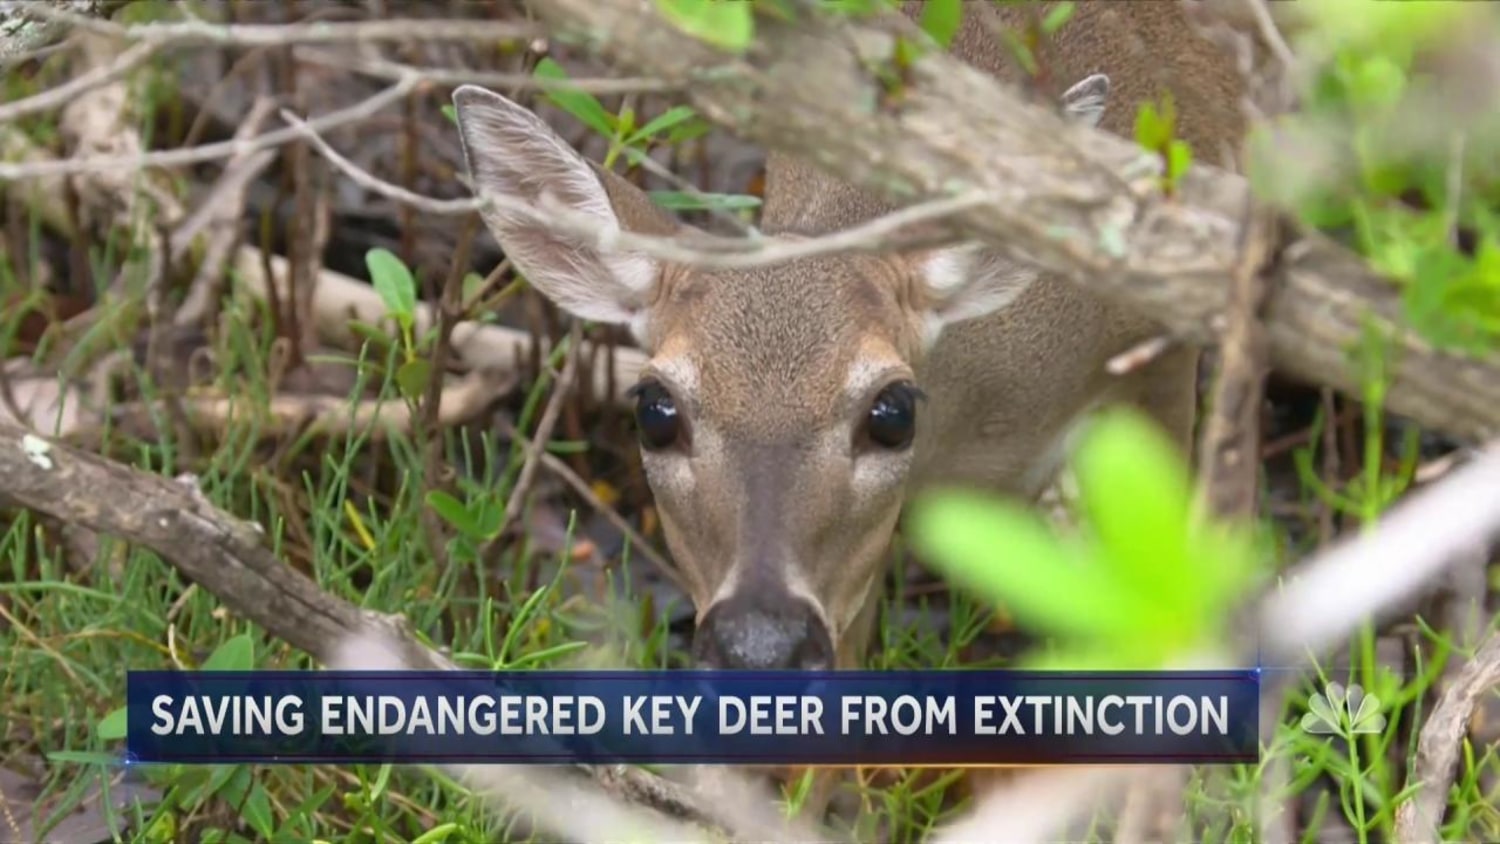 Saving Key Deer Means New Relationships With Wild Animals